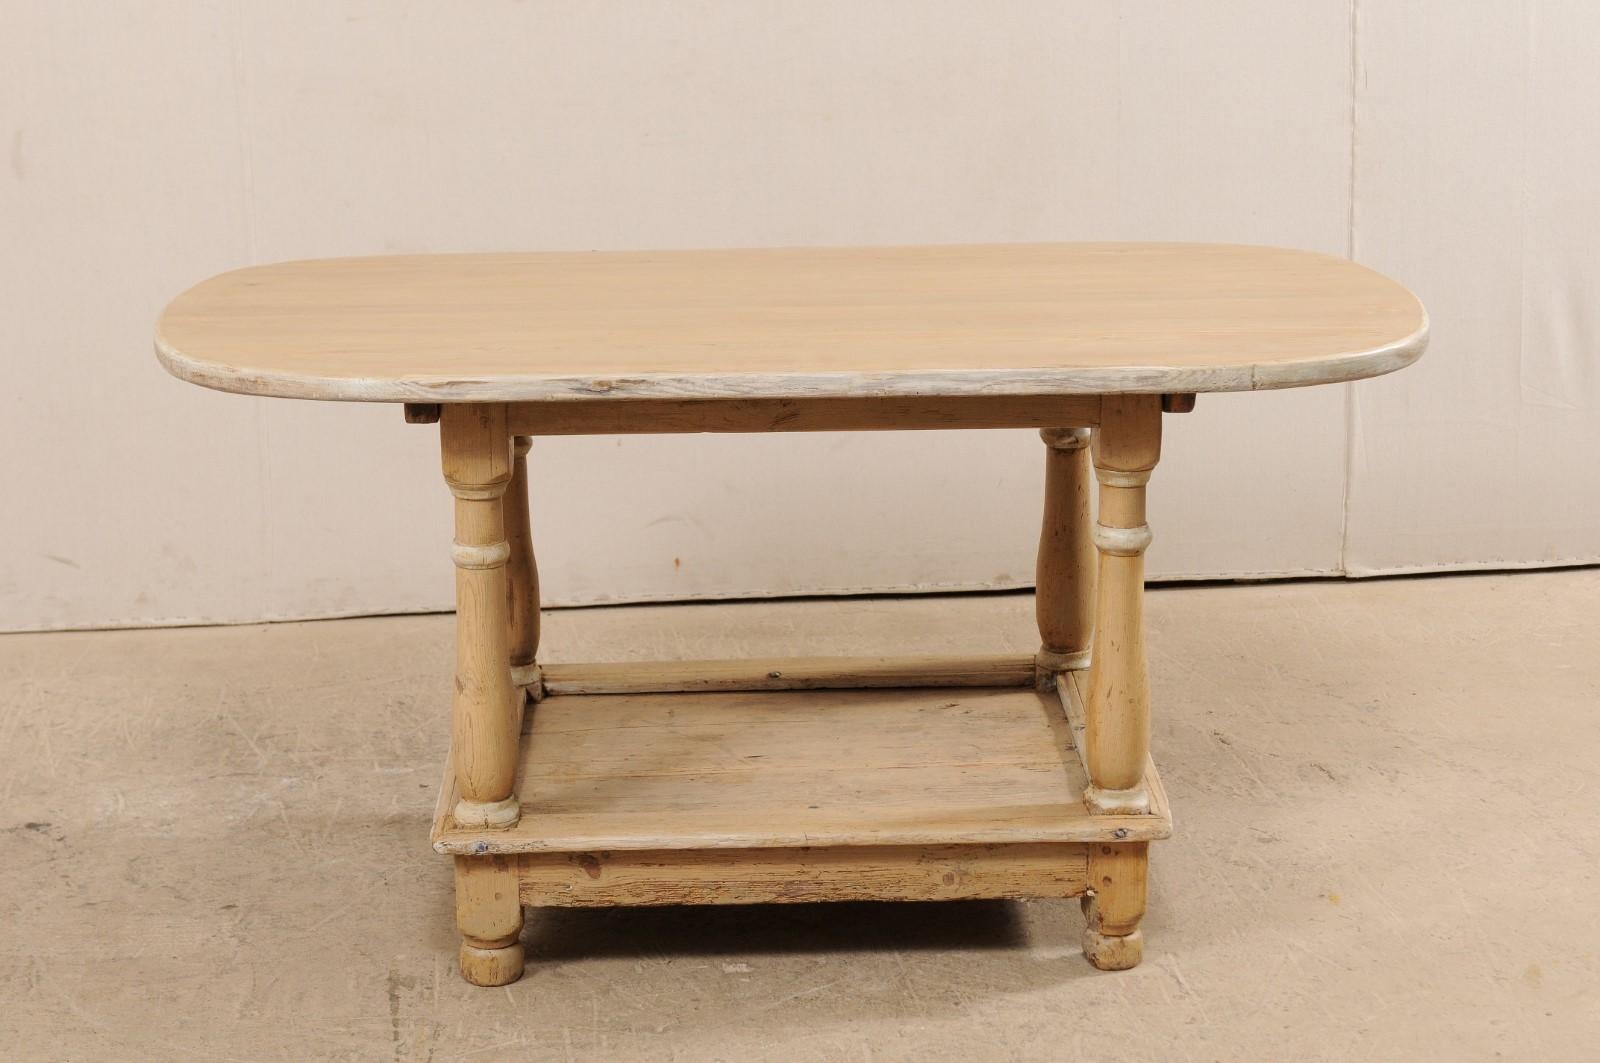 Carved An Early 19th Century Swedish Bleached & Painted Wood Two-Tier Oval Table For Sale